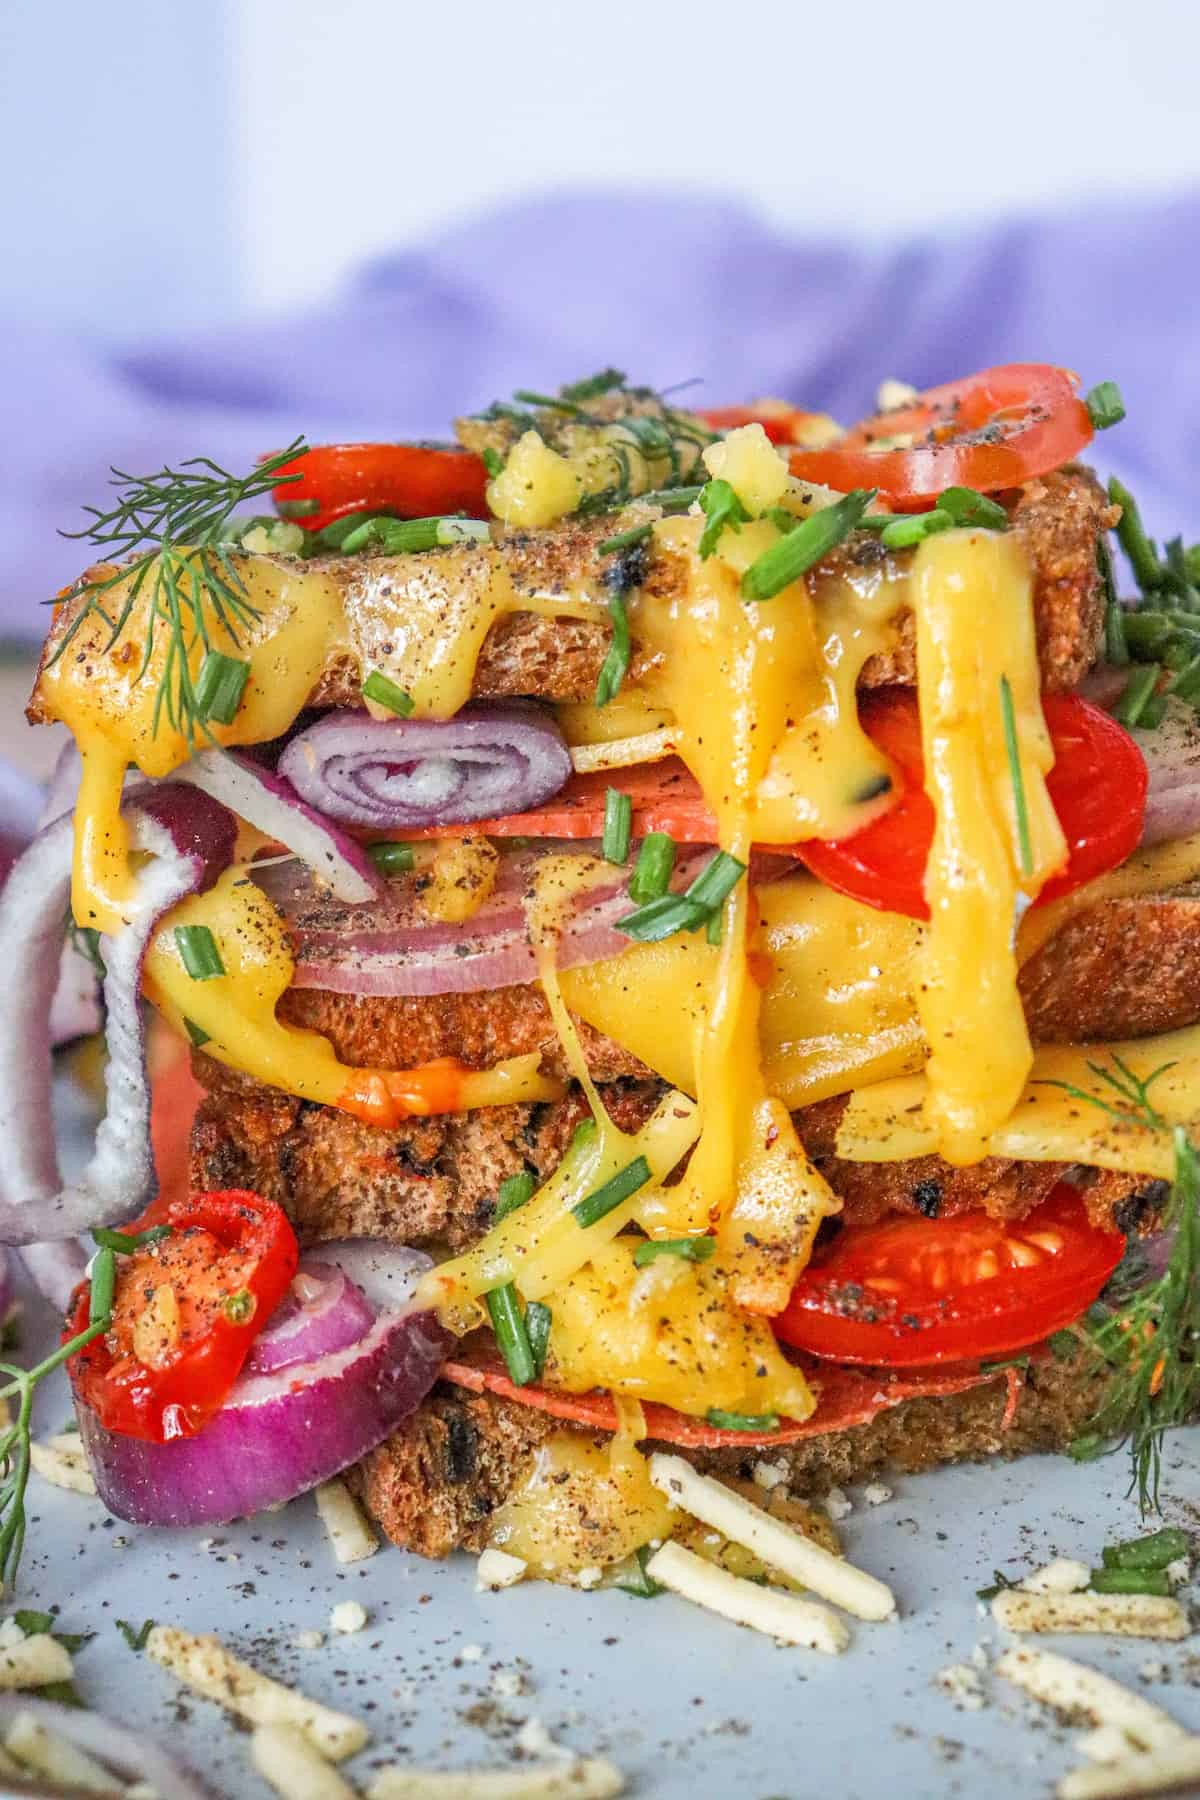 A stack of vegan sandwiches with melty cheese and tomatoes.